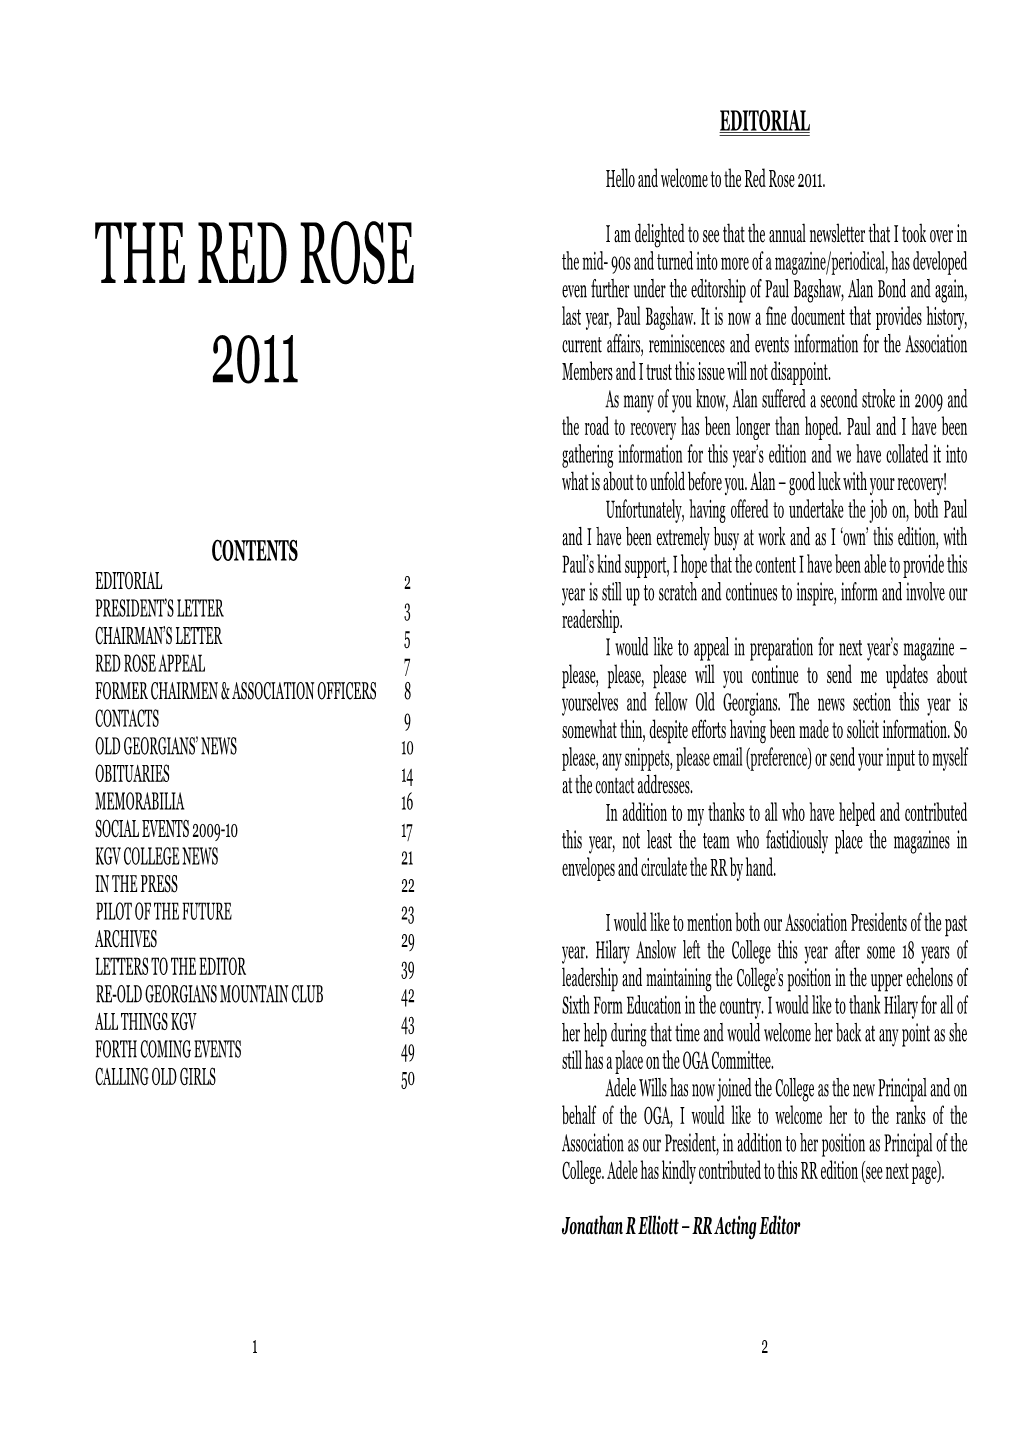 The Red Rose 2011